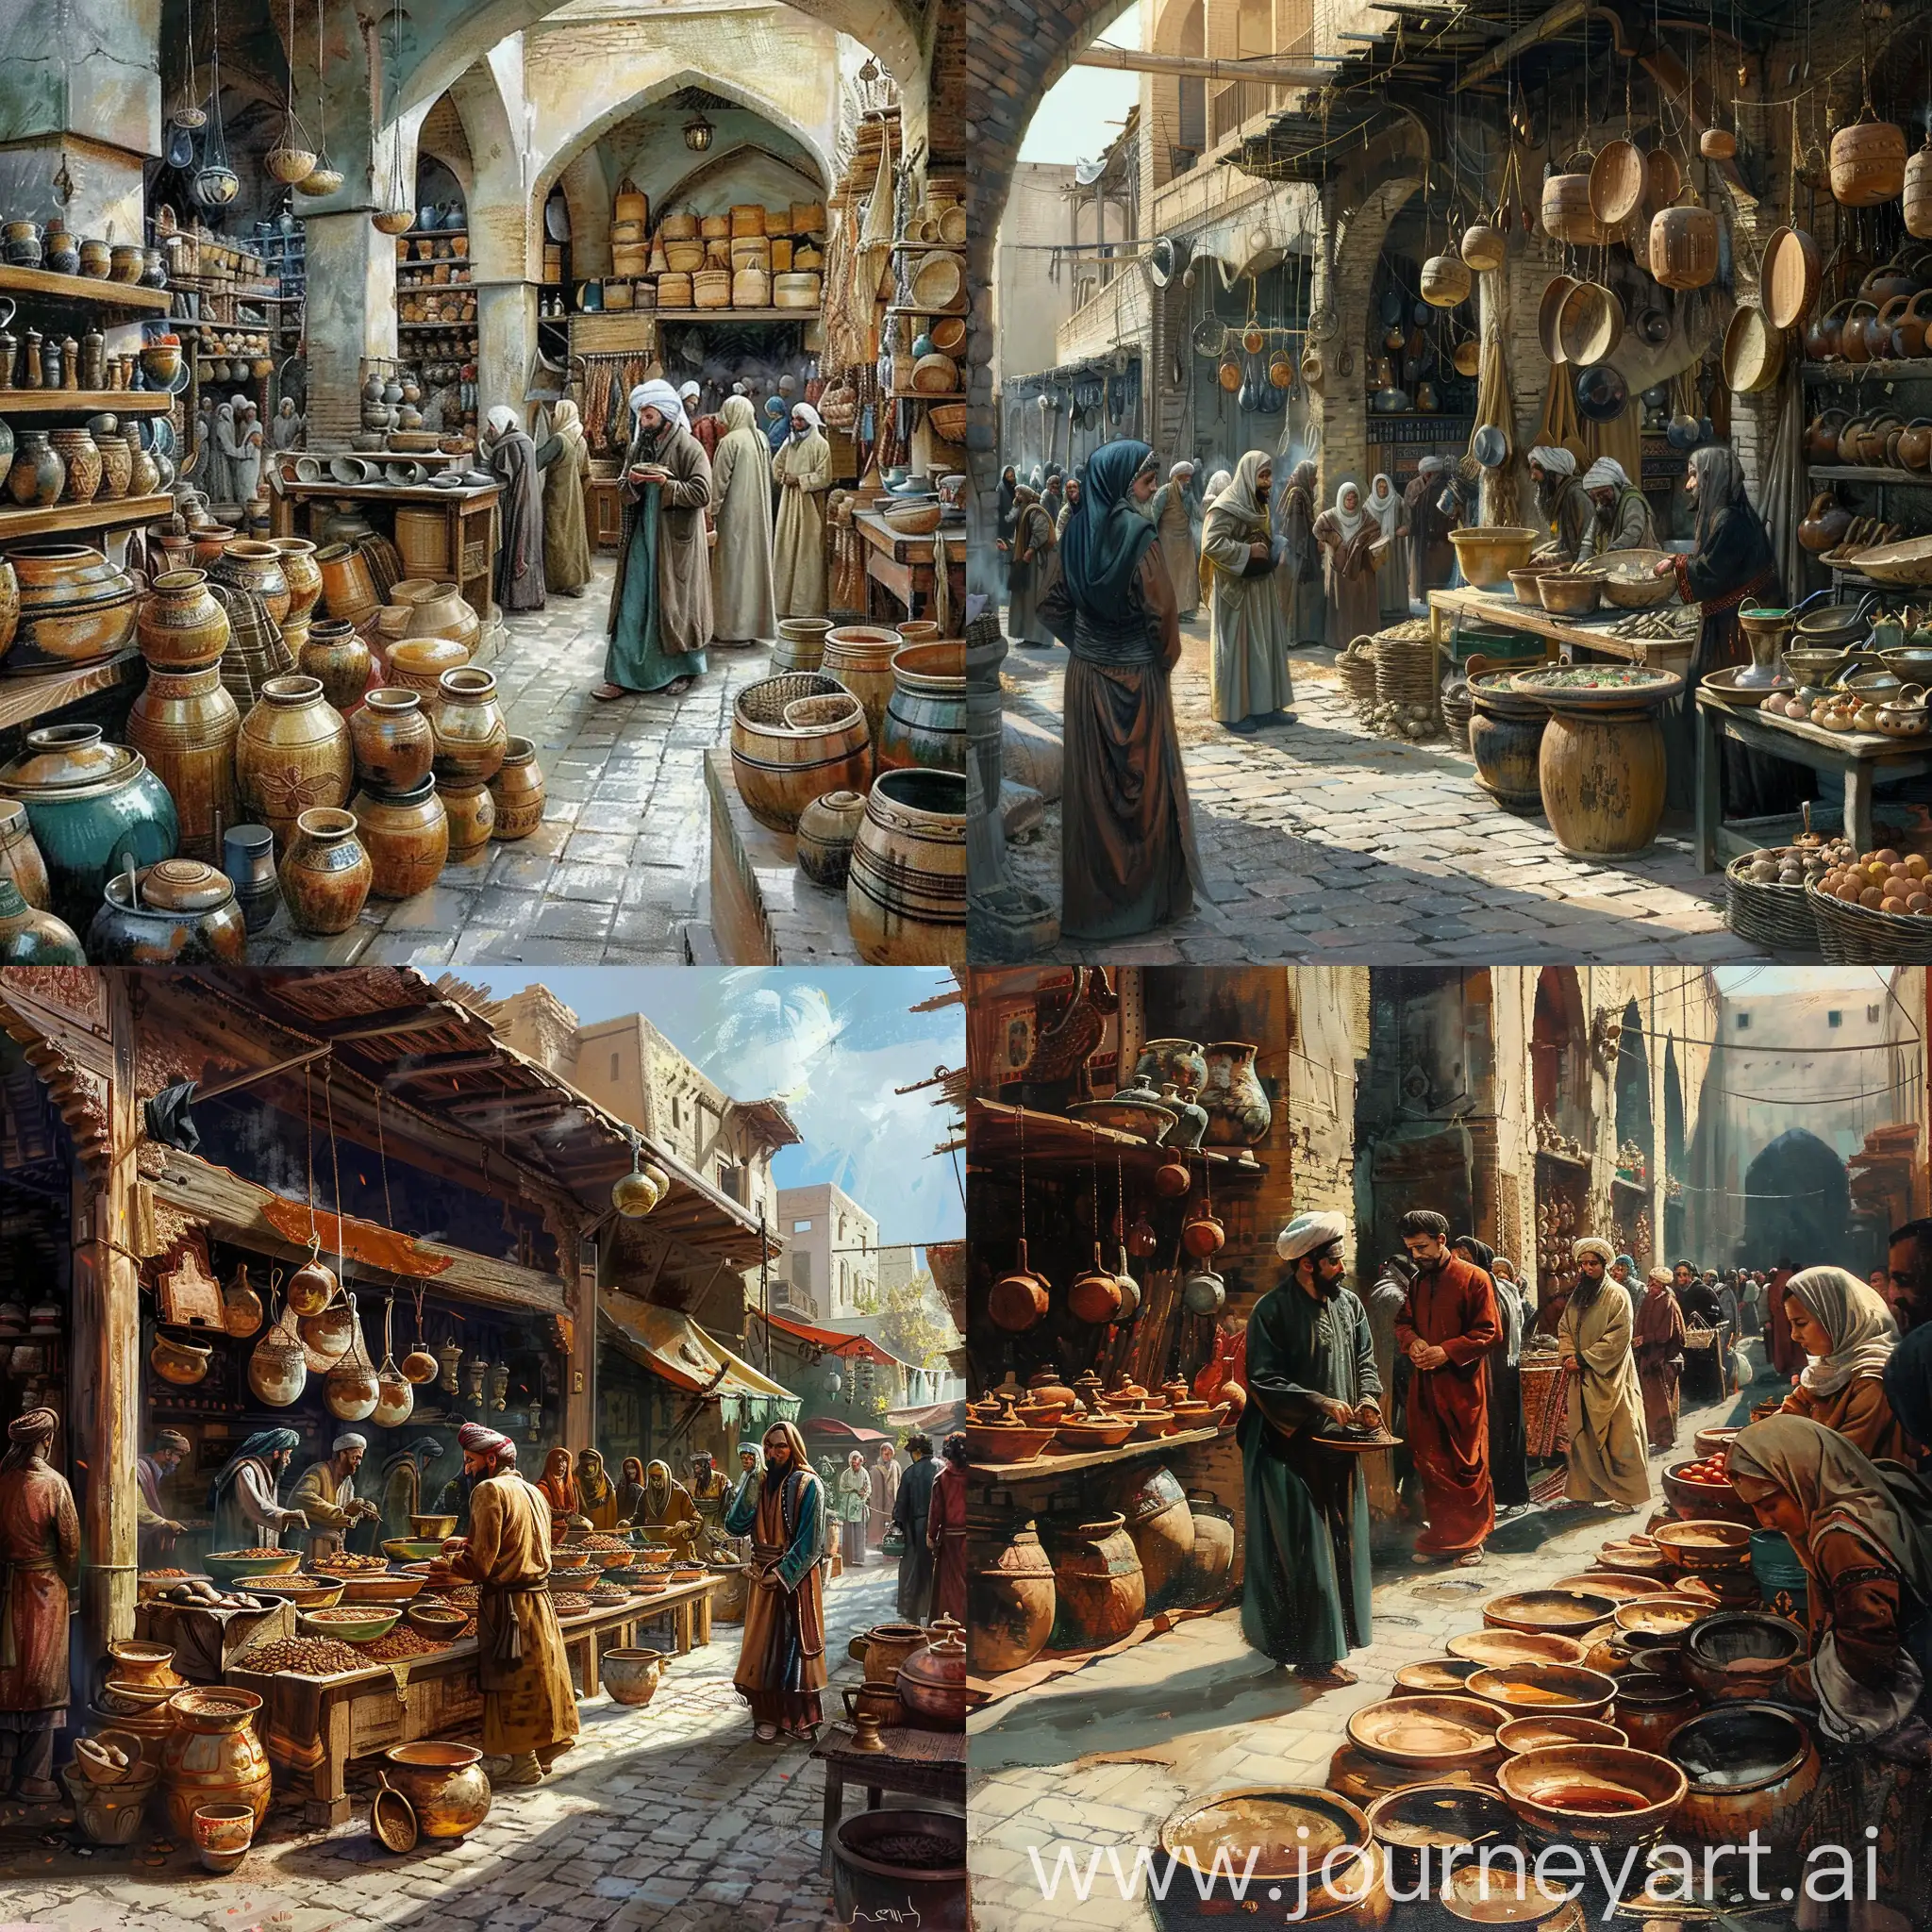 Exquisite-Attire-at-Ancient-Iranian-Marketplace-with-Wooden-Utensils